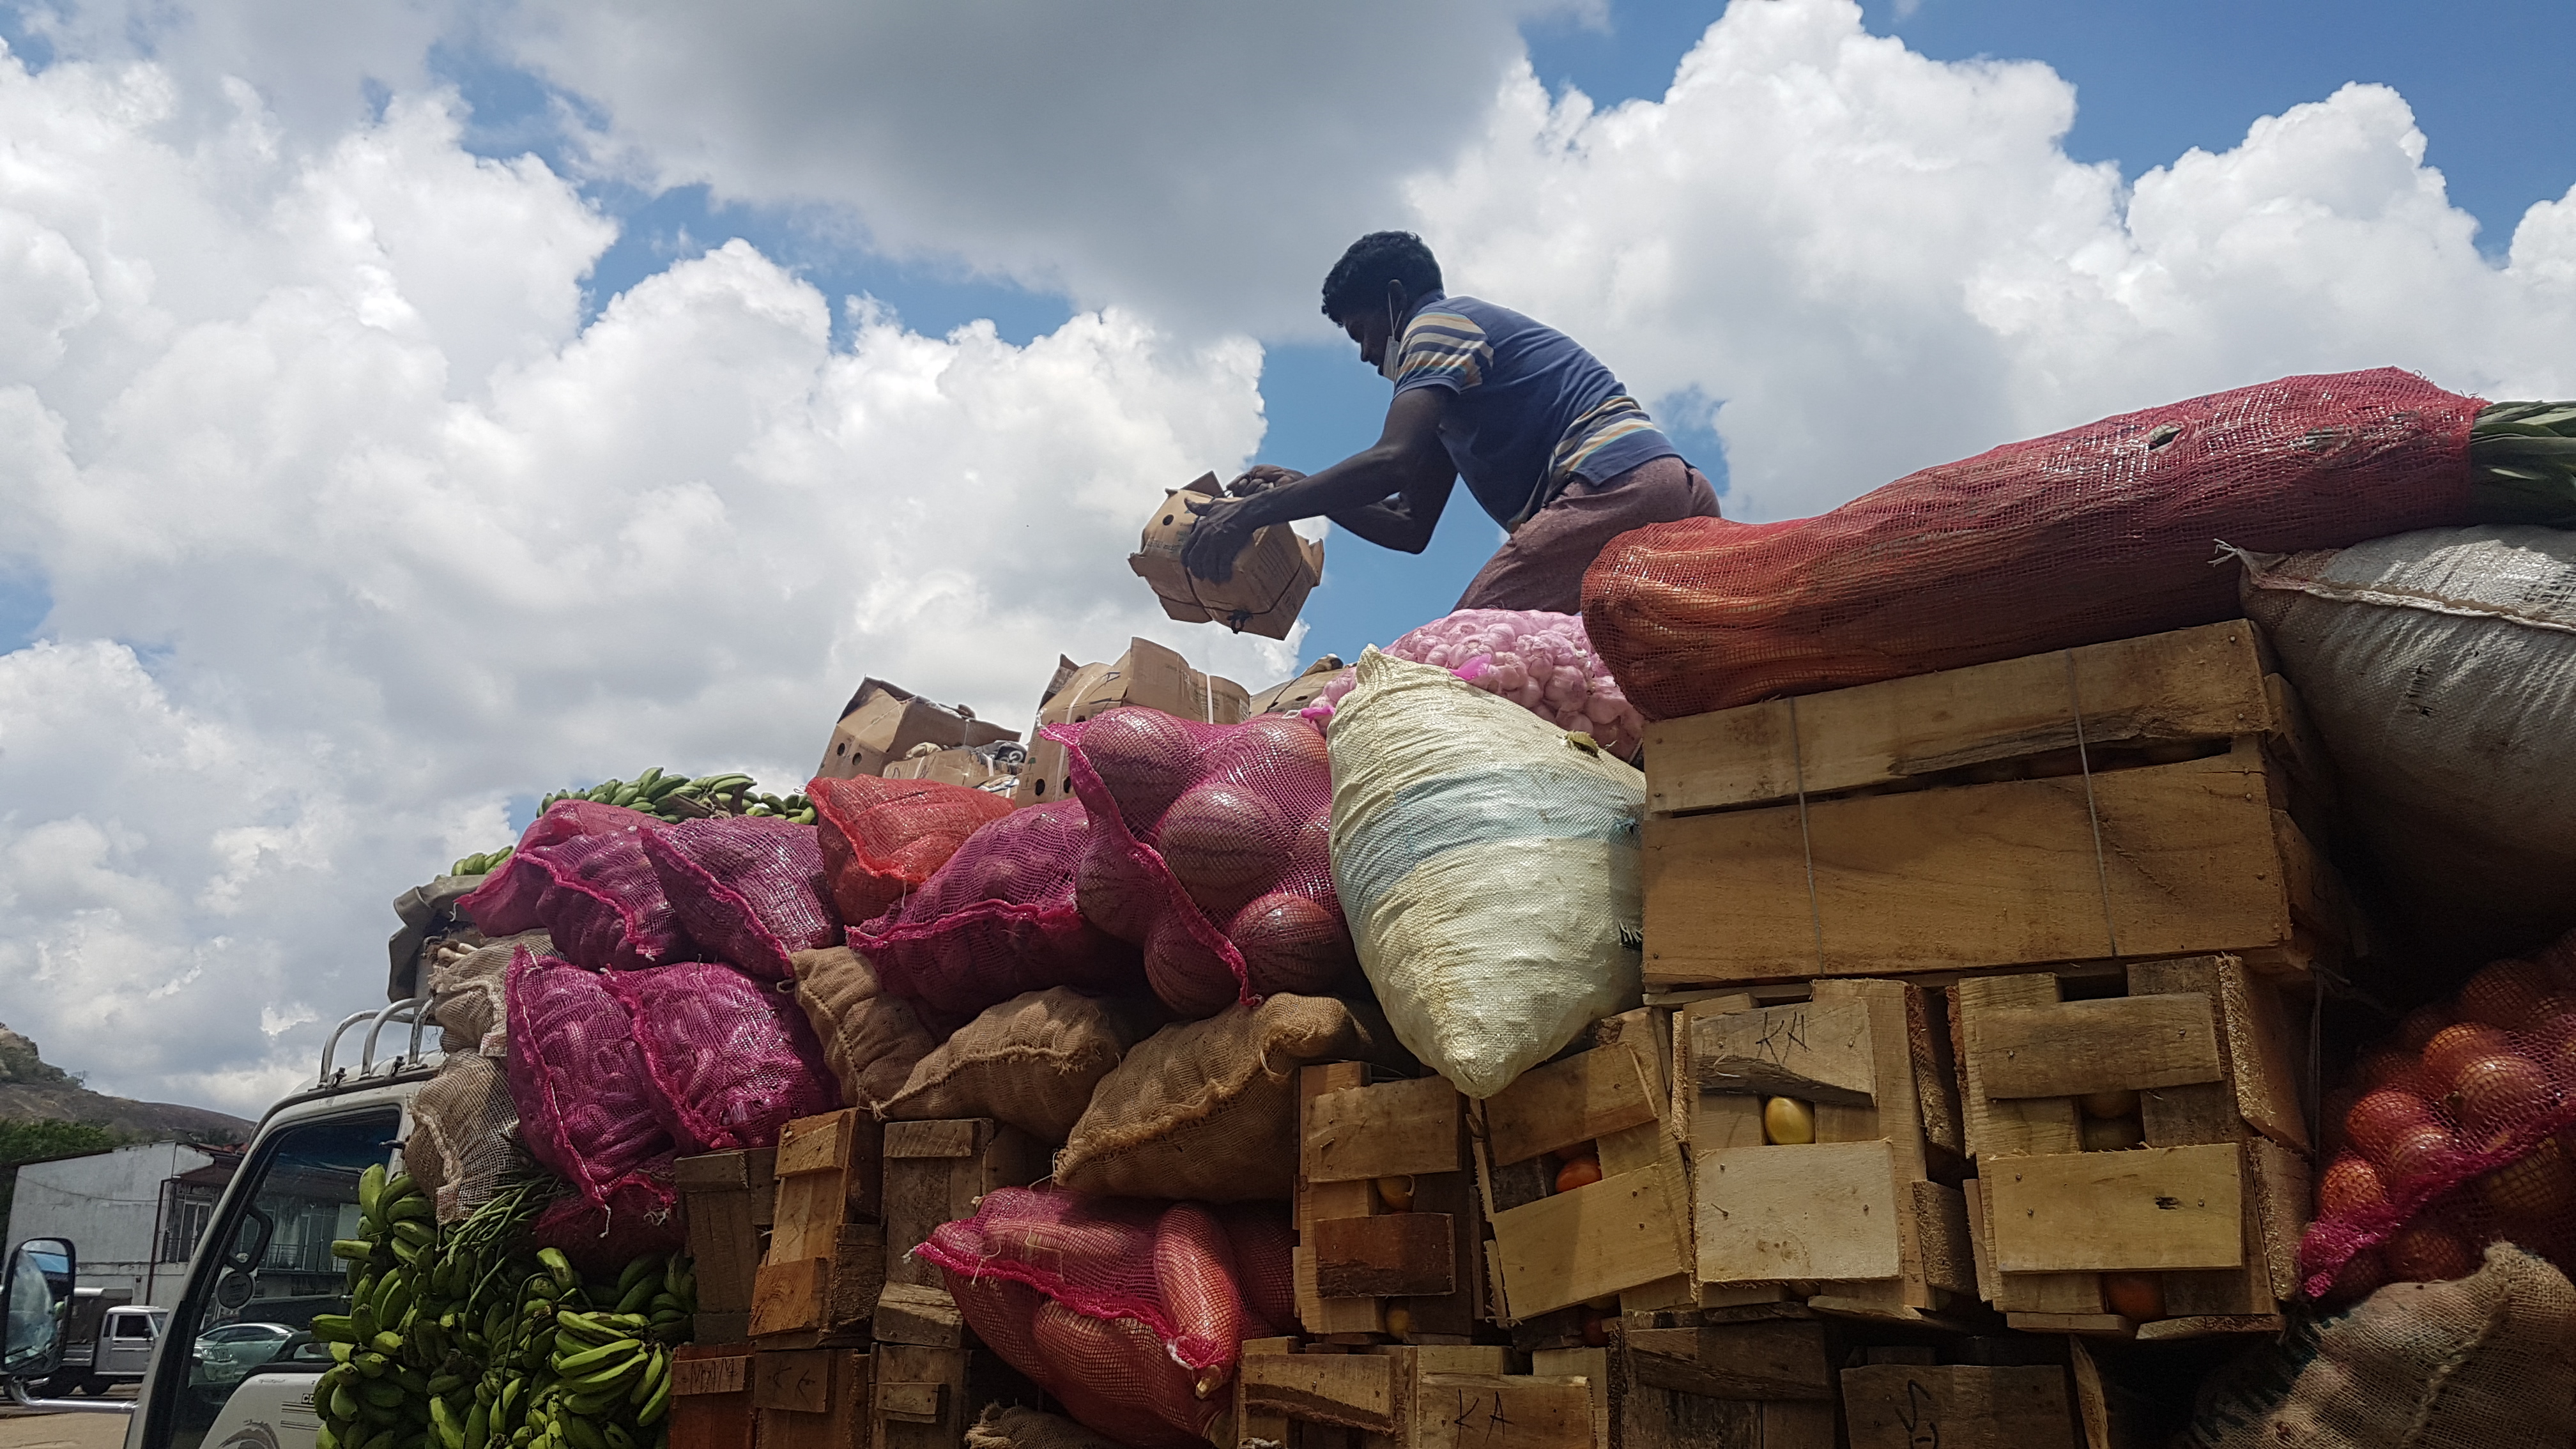 A man loads boxes and sacks laden with produce into a lorry leaving the Dambulla market, most likely for another market outside the city.